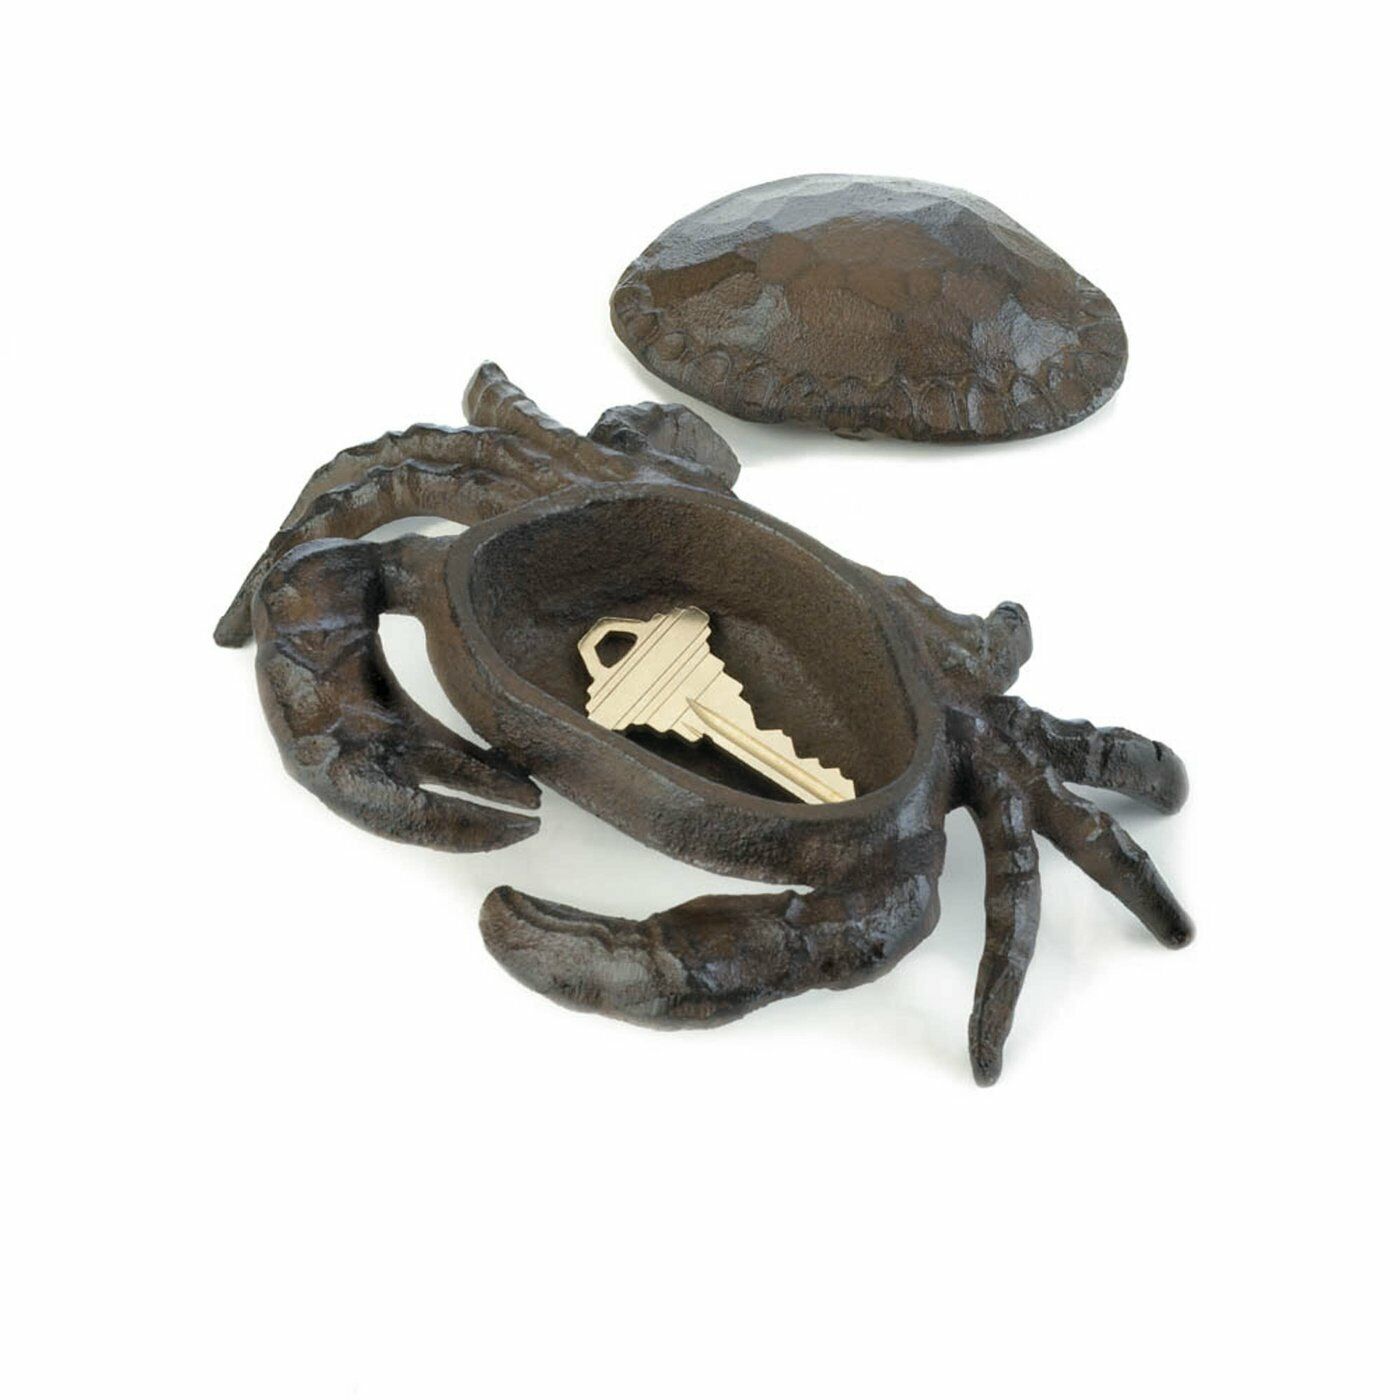 Set Of 2 Charming Rustic Cast Iron Whimsical Sea Crab Garden Key Hider Statue